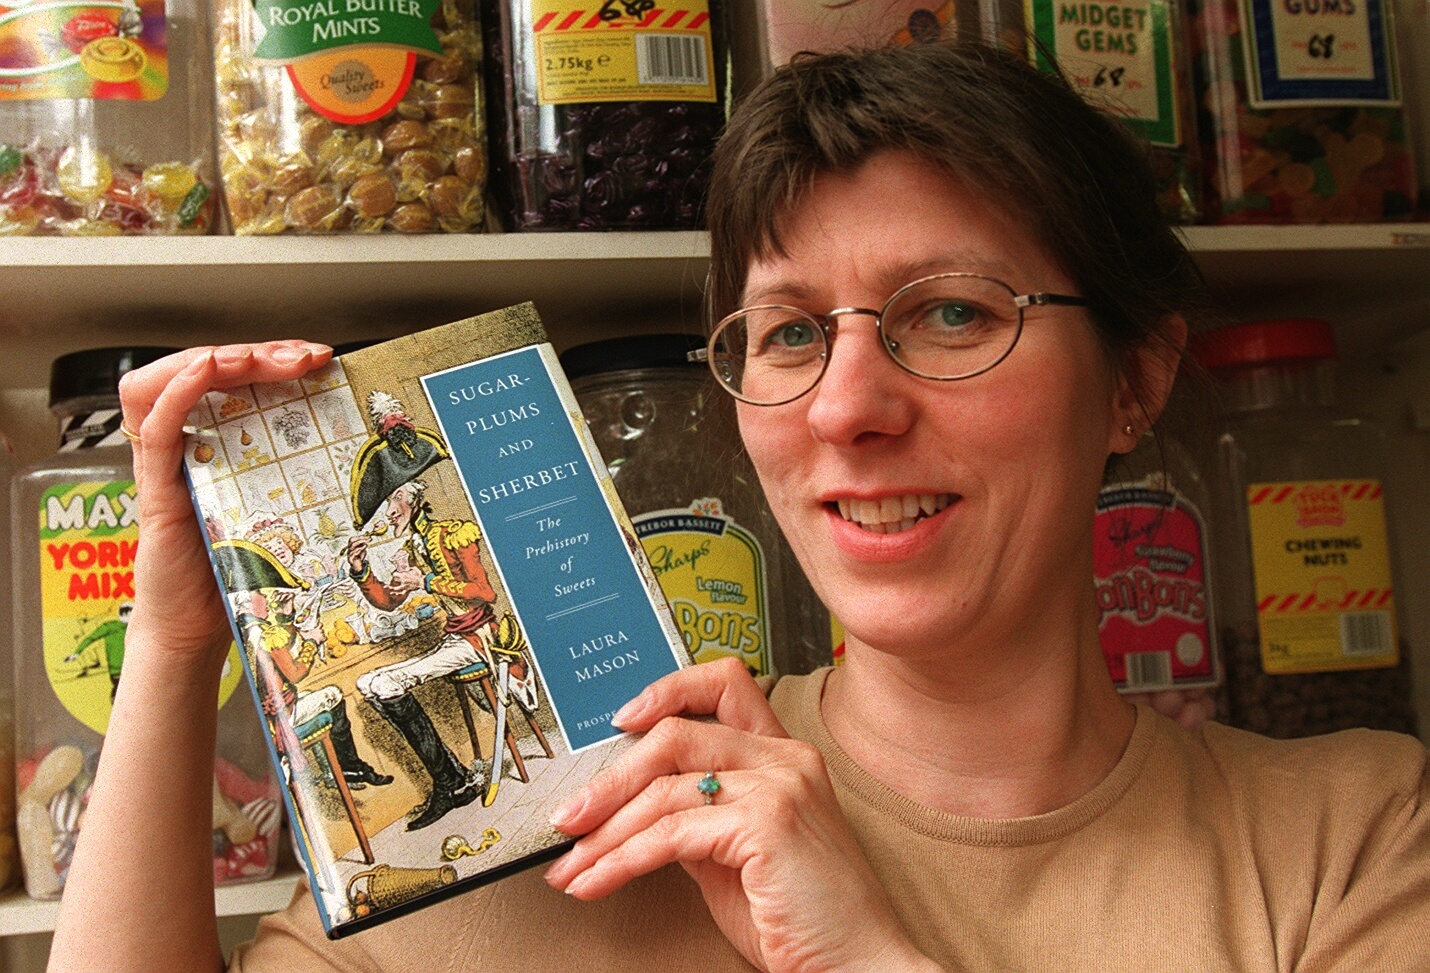 York author Laura Mason with her book Sugar-Plums and Sherbet in July 1998